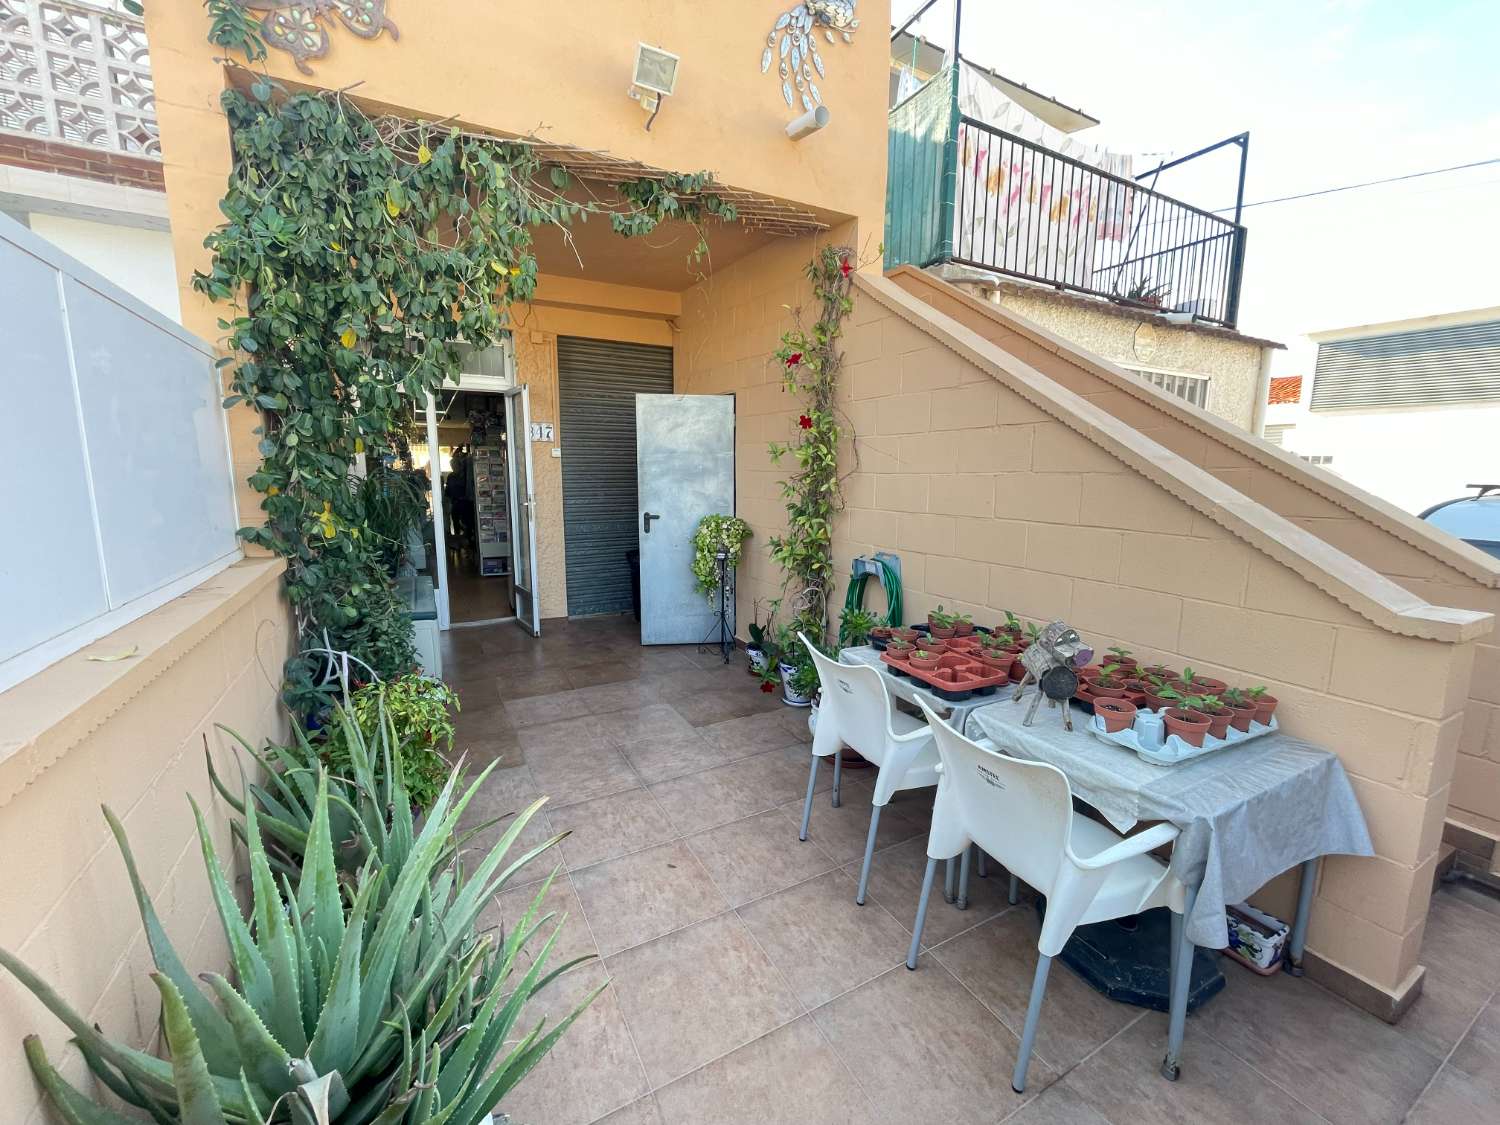 Nice shop and apartment located in Torrevieja